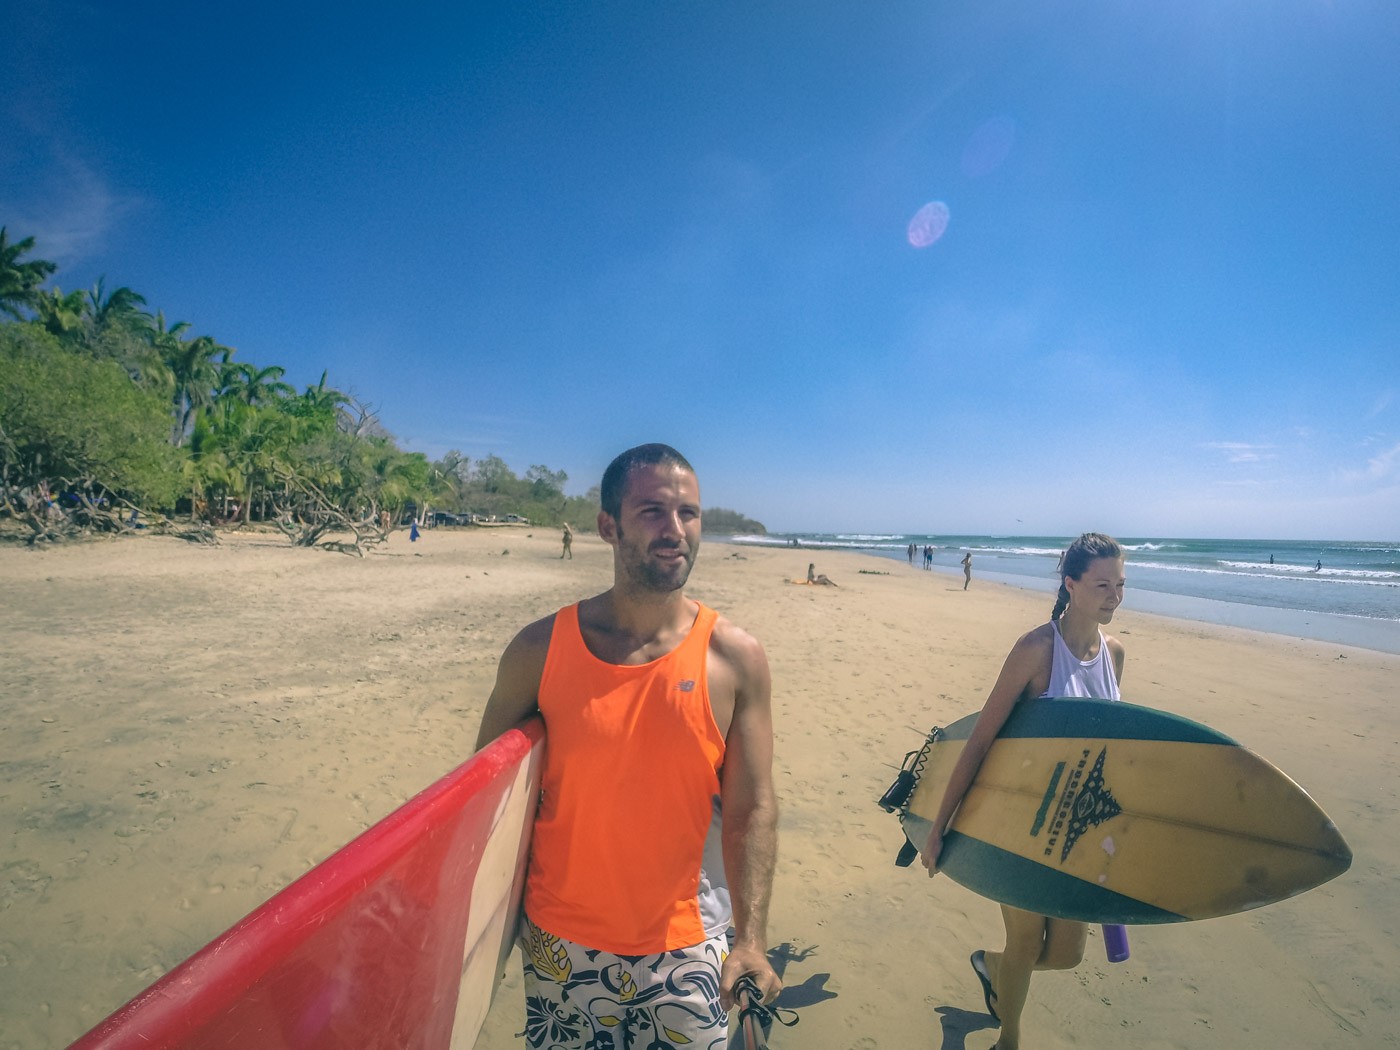 Costa Rica itinerary: Max and Oksana heading out for a surf. Playa Avellanas. Costa Rica